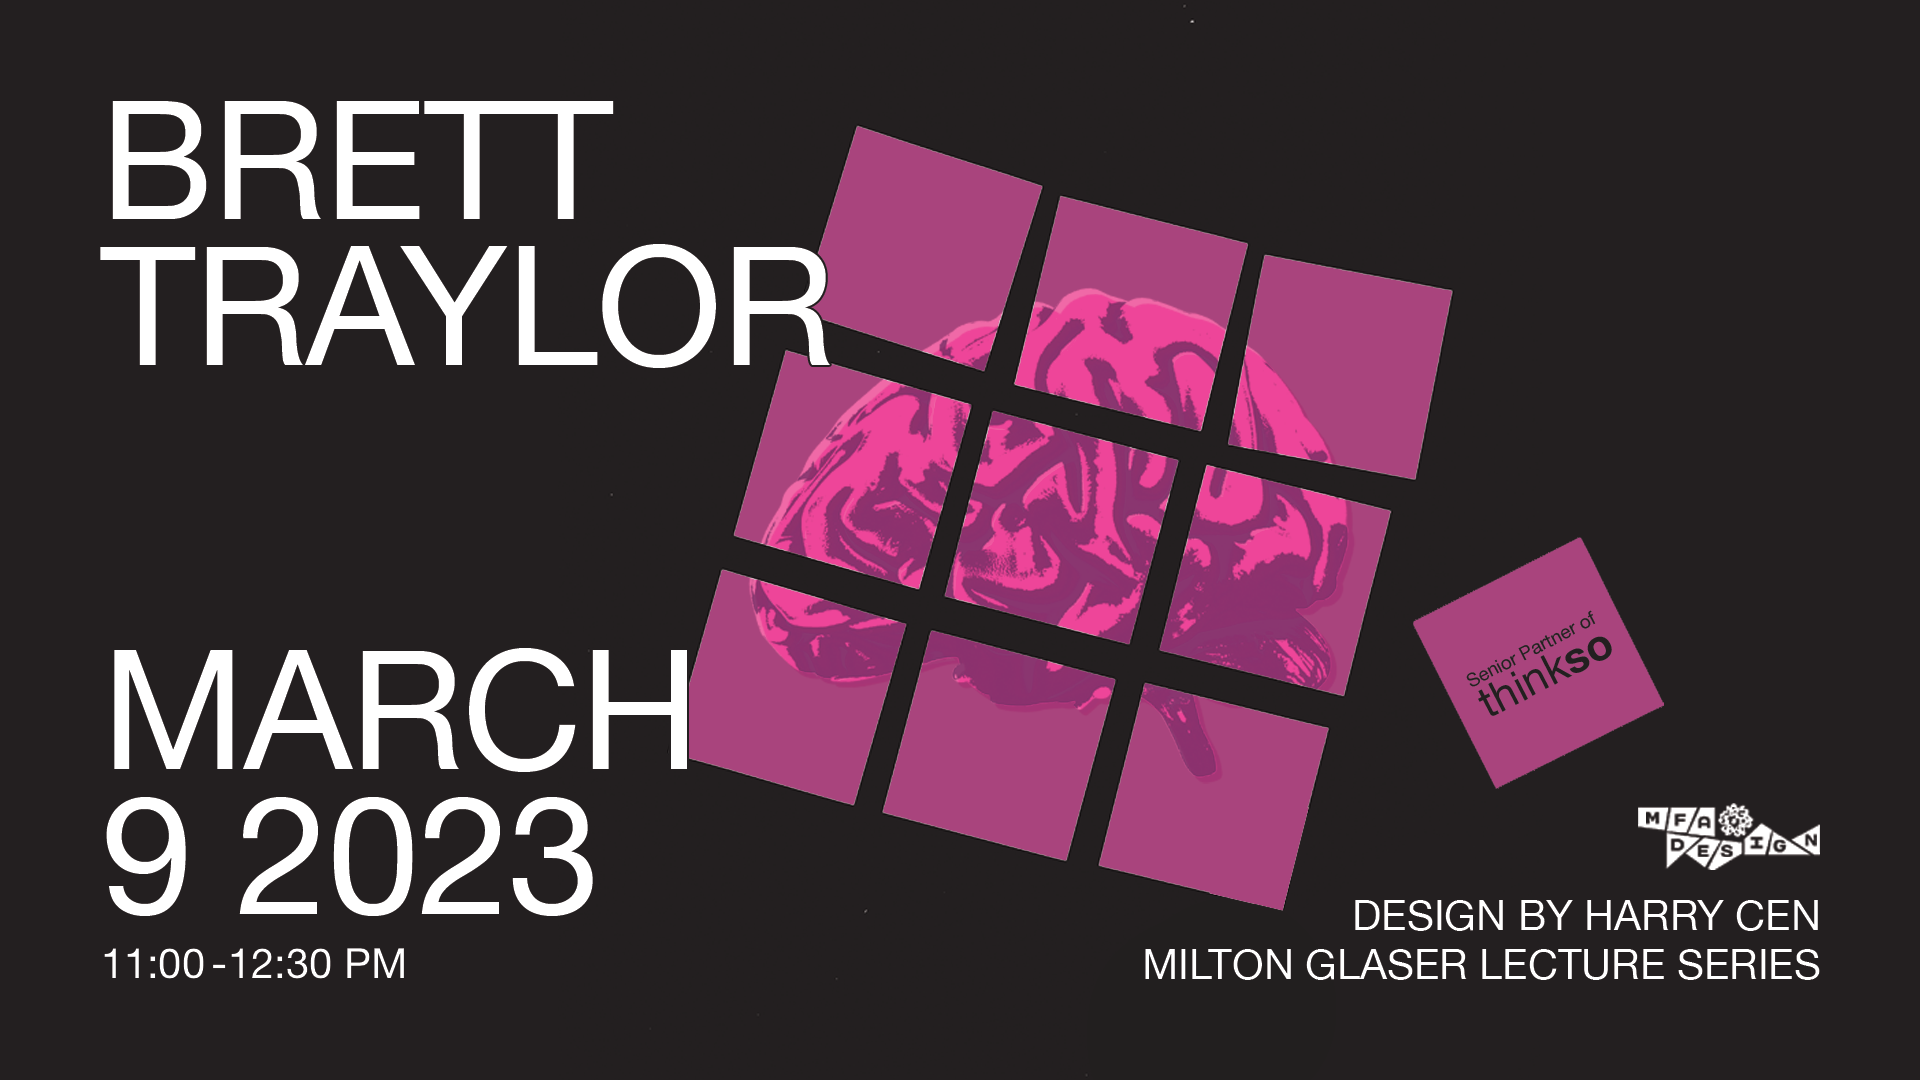 black and pink poster for Brett Traylor lecture